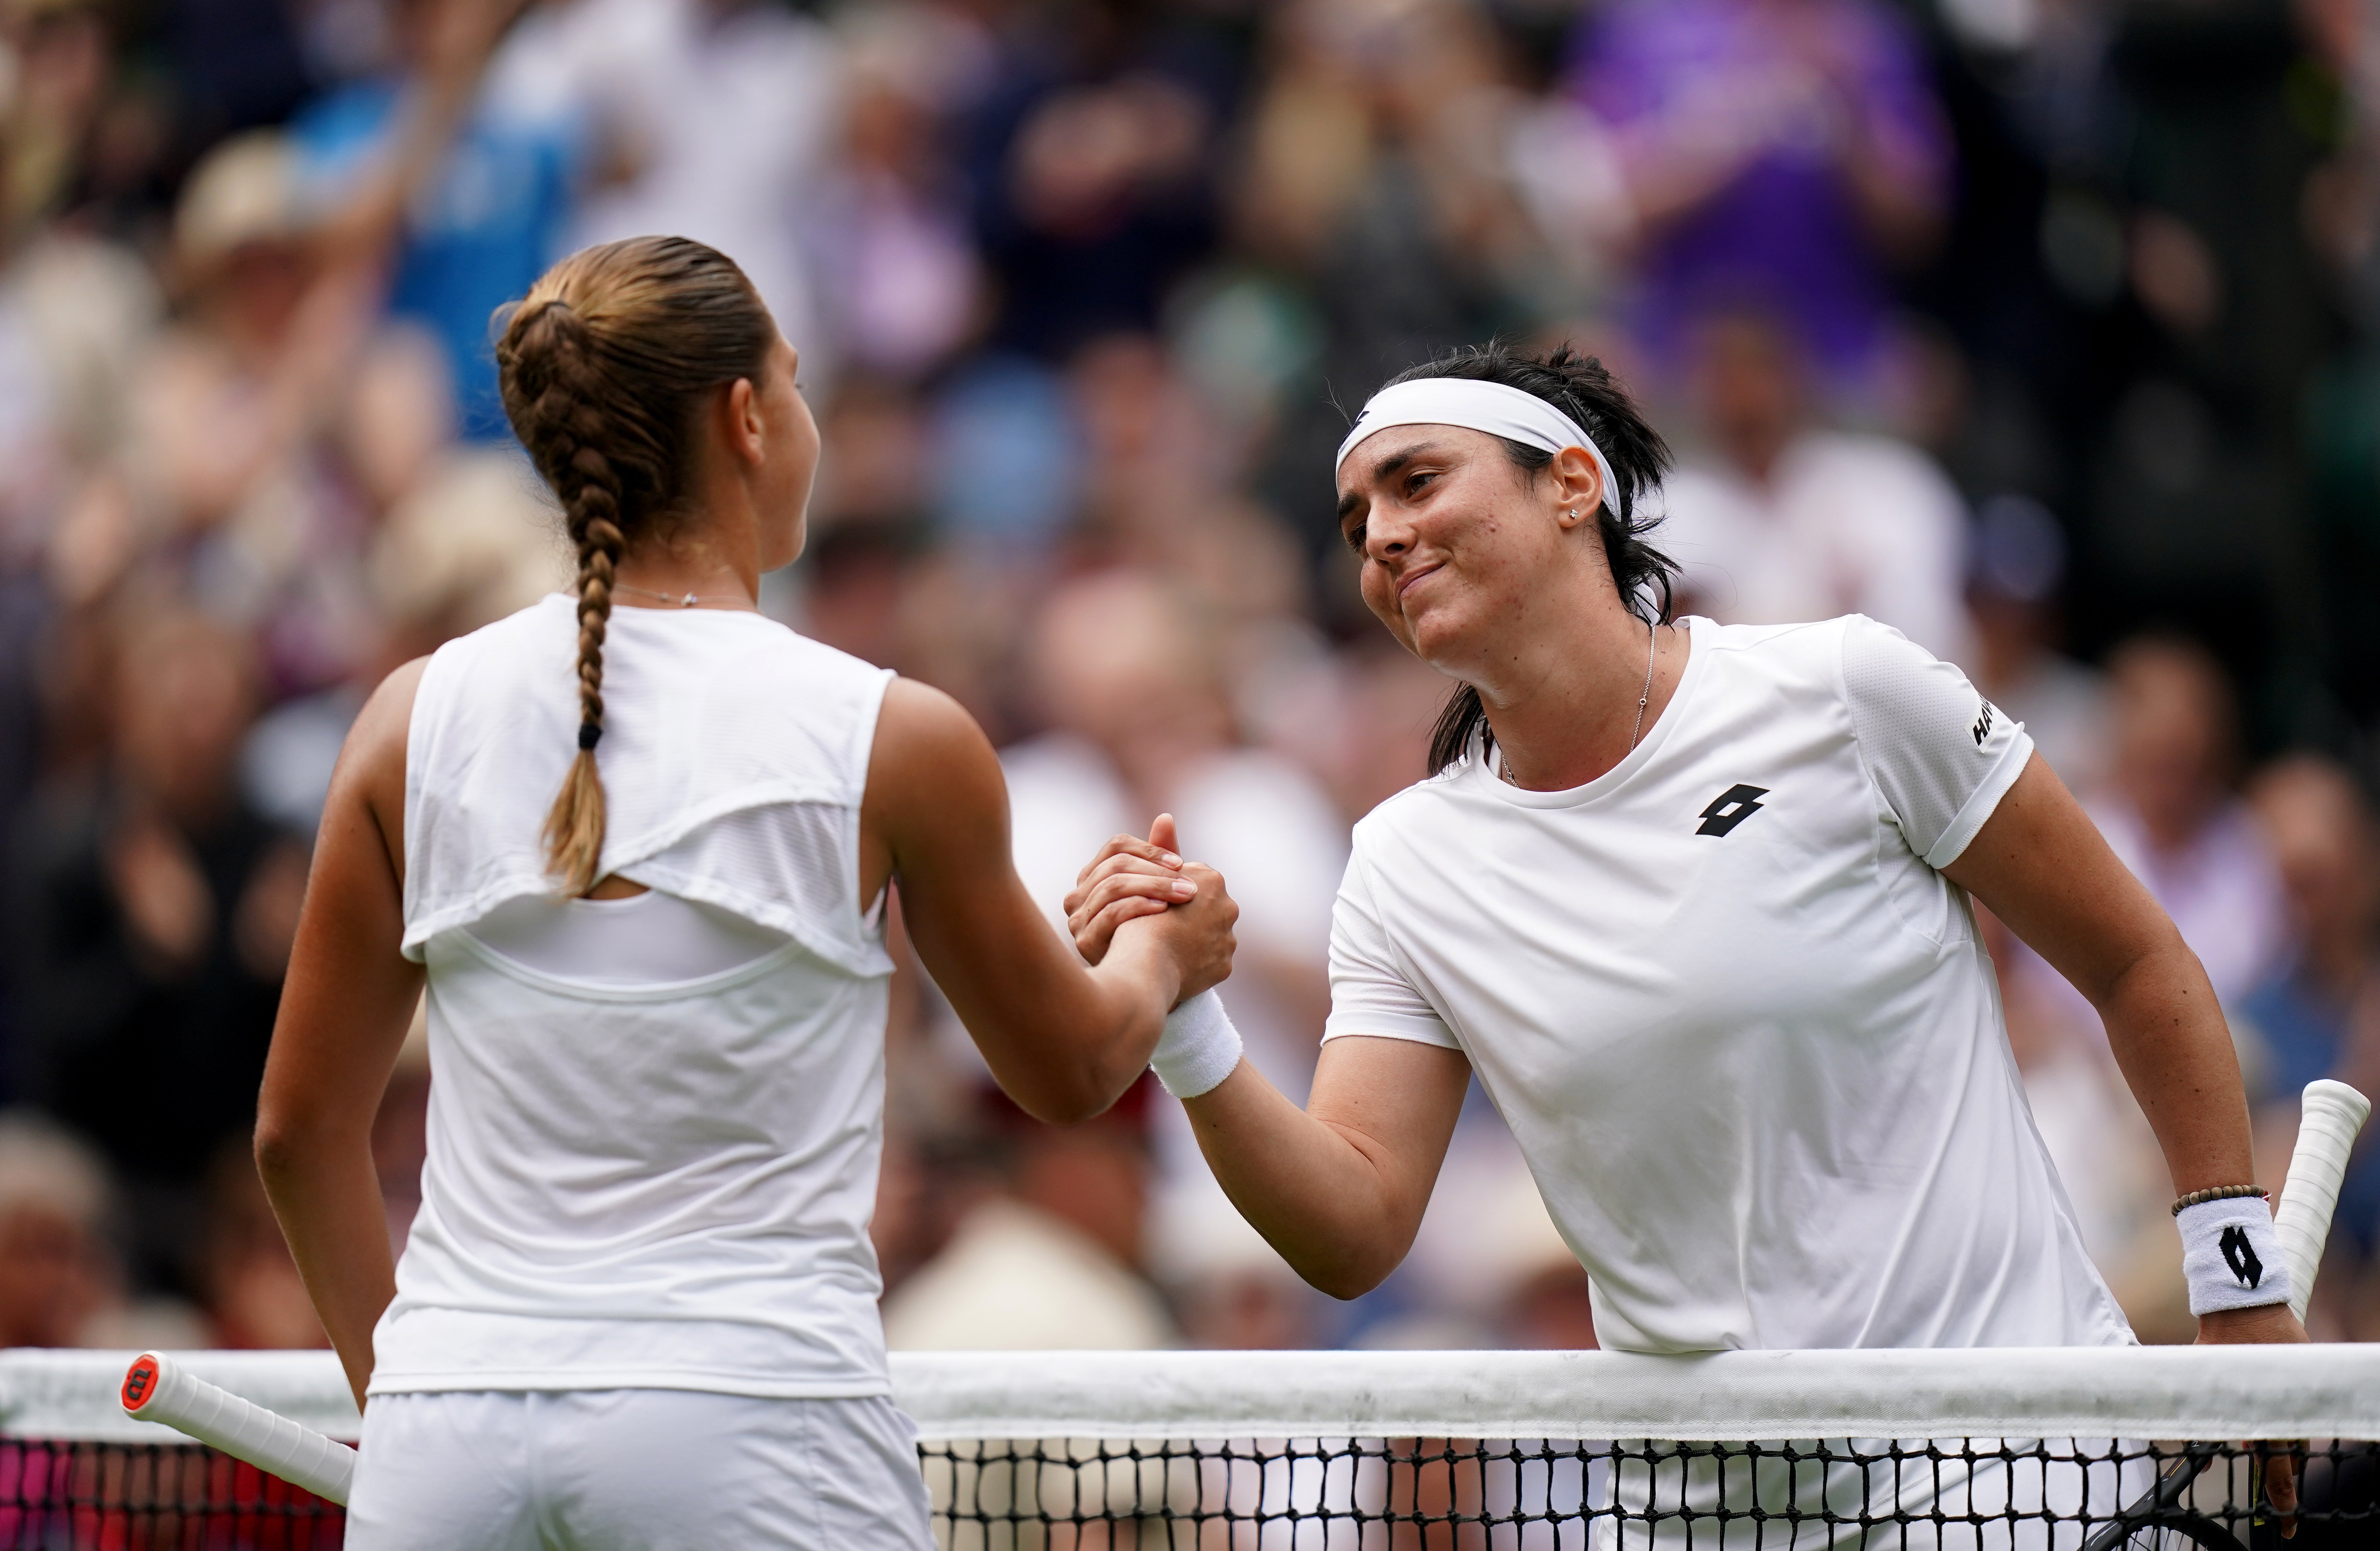 Ons Jabeur shakes hands with Diane Parry (left) after winning in the Wimbledon third round (Adam Davy/PA)